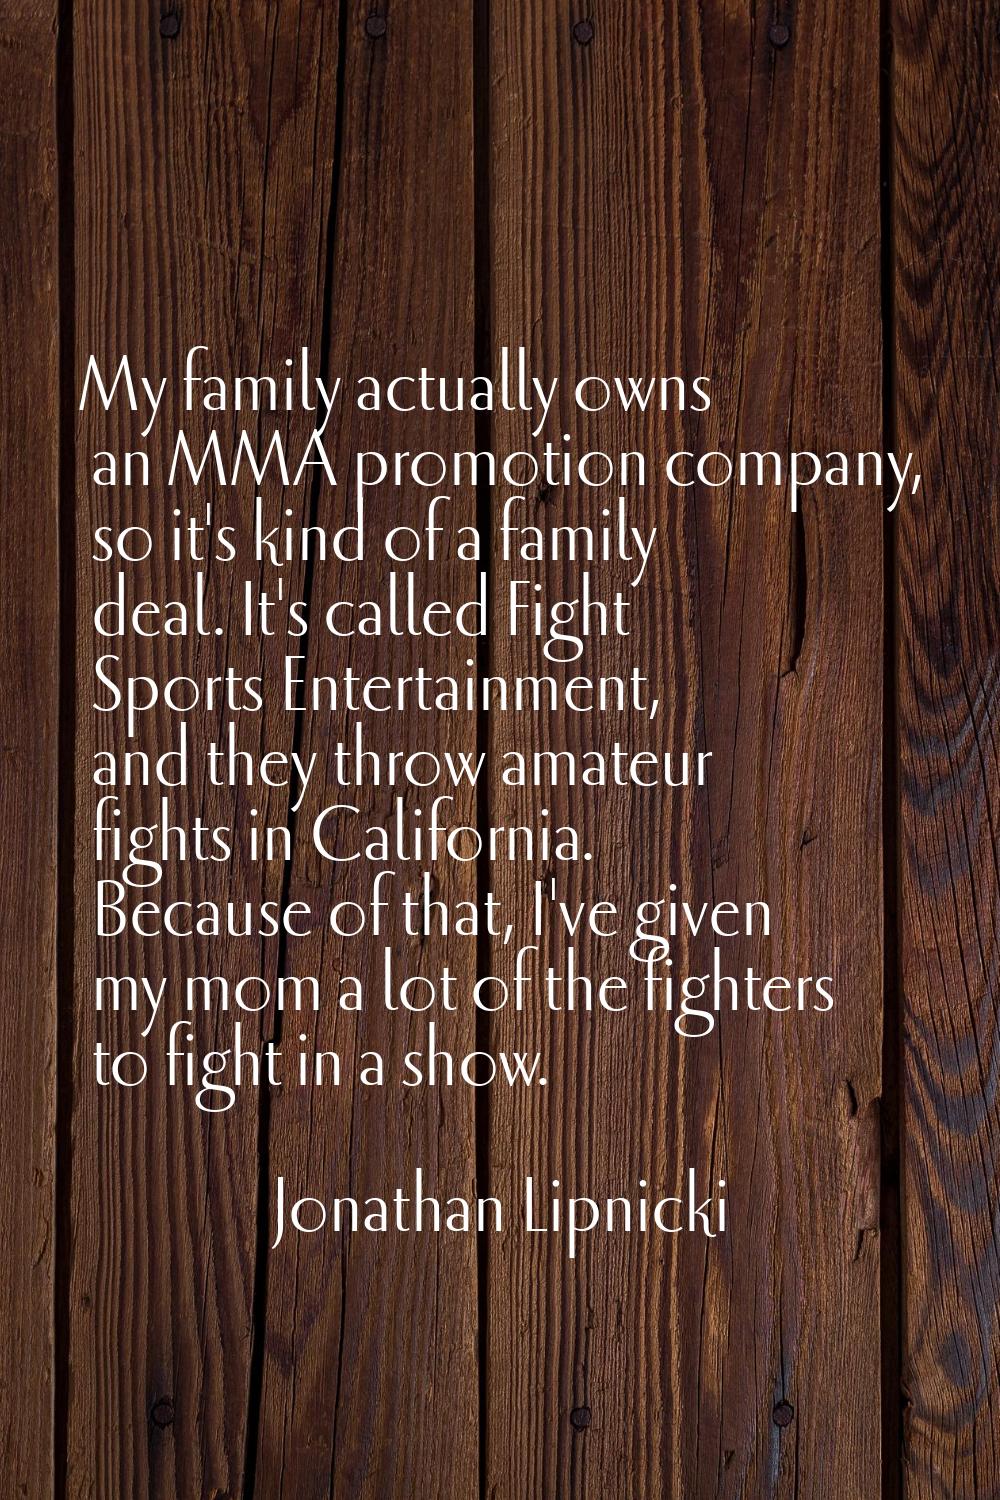 My family actually owns an MMA promotion company, so it's kind of a family deal. It's called Fight 